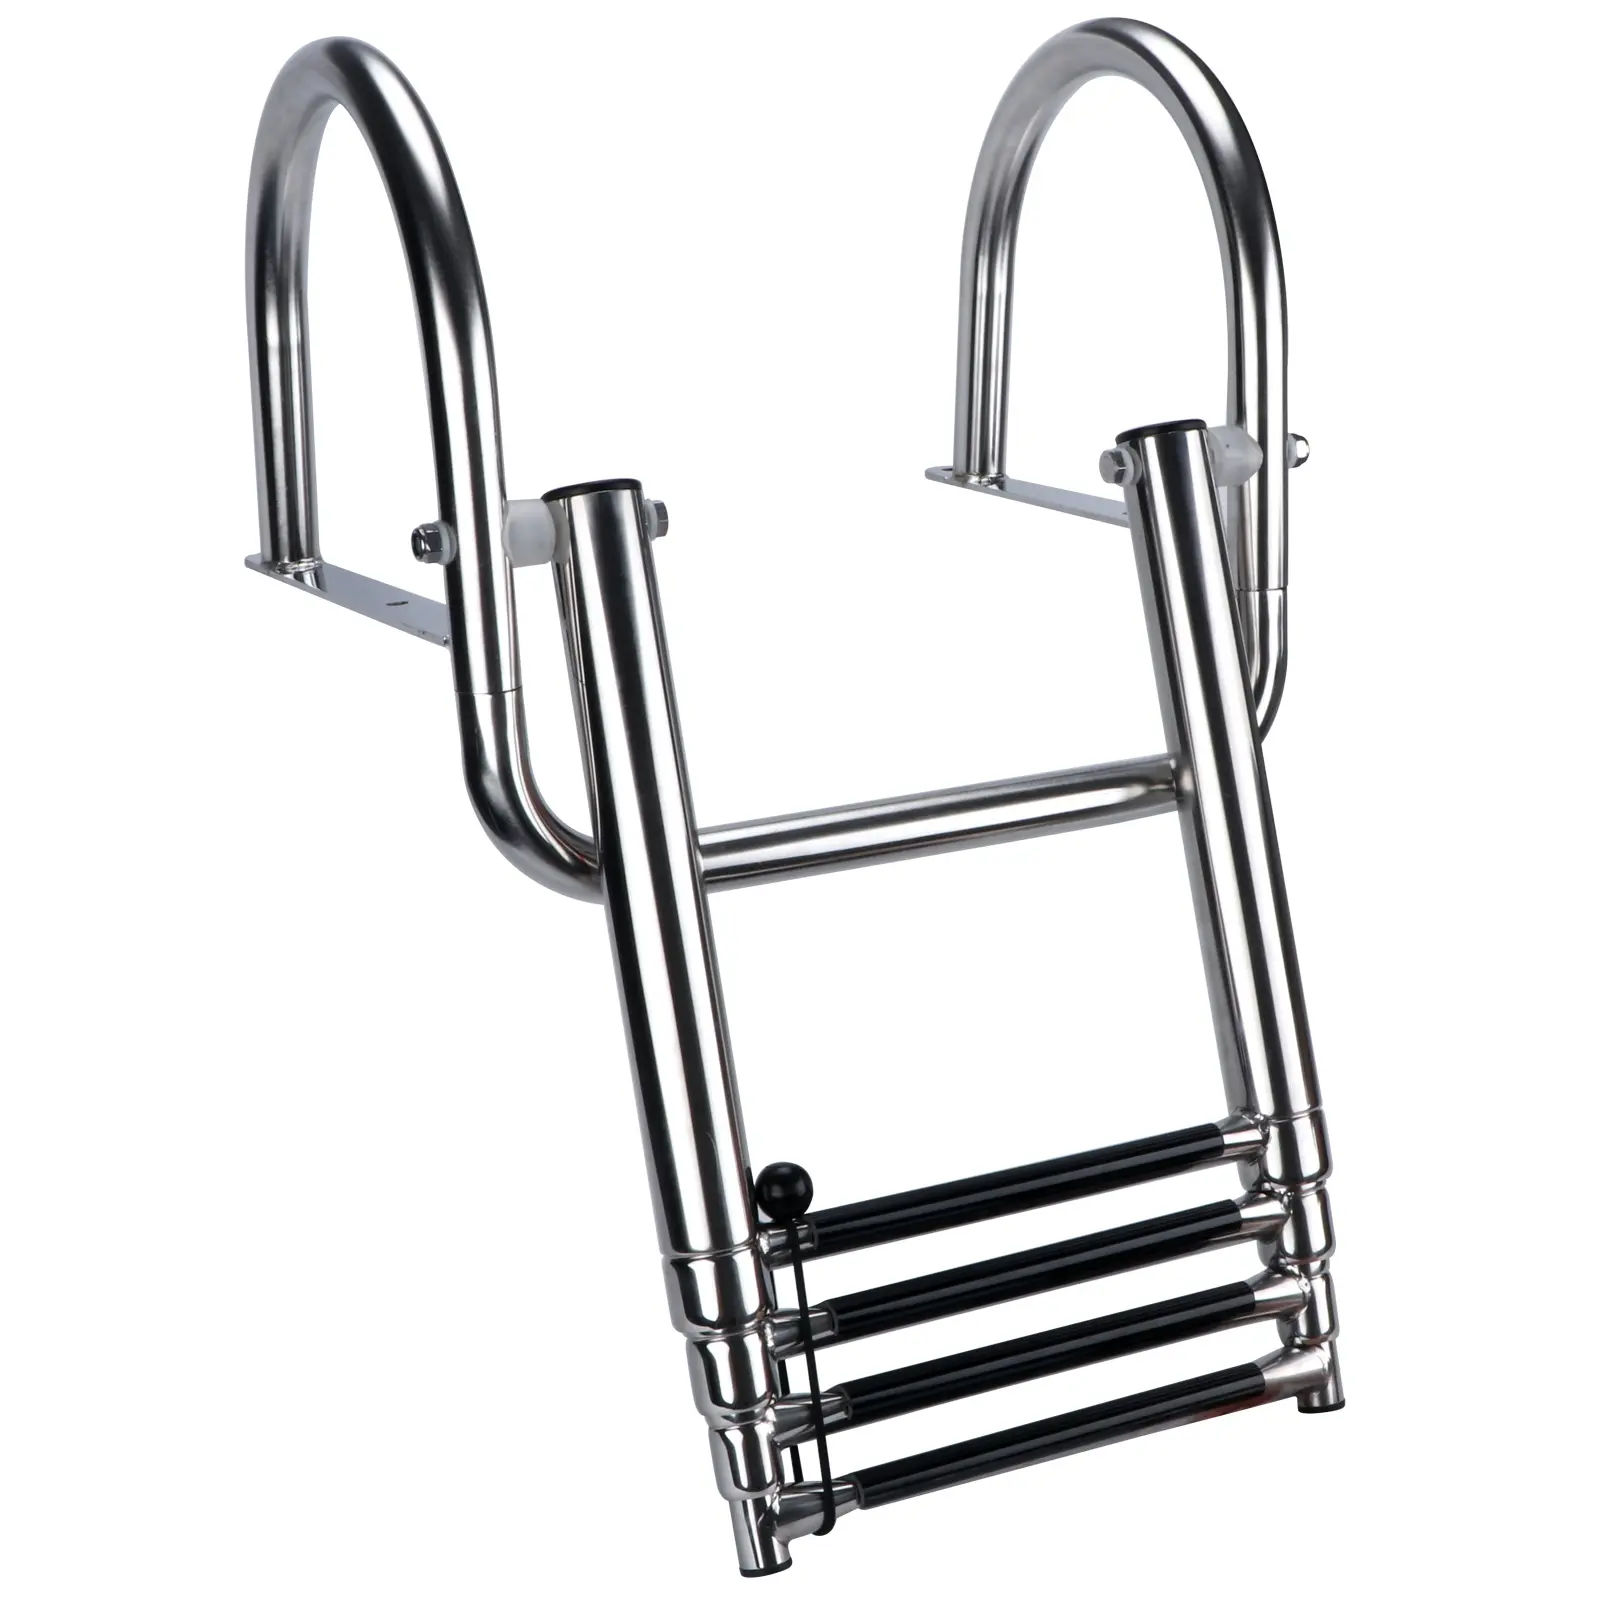 Boat Parts 4 Step Folding Boat Ladder 316 Stainless Steel Concealed Telescopic Marine Ladder with Handrail